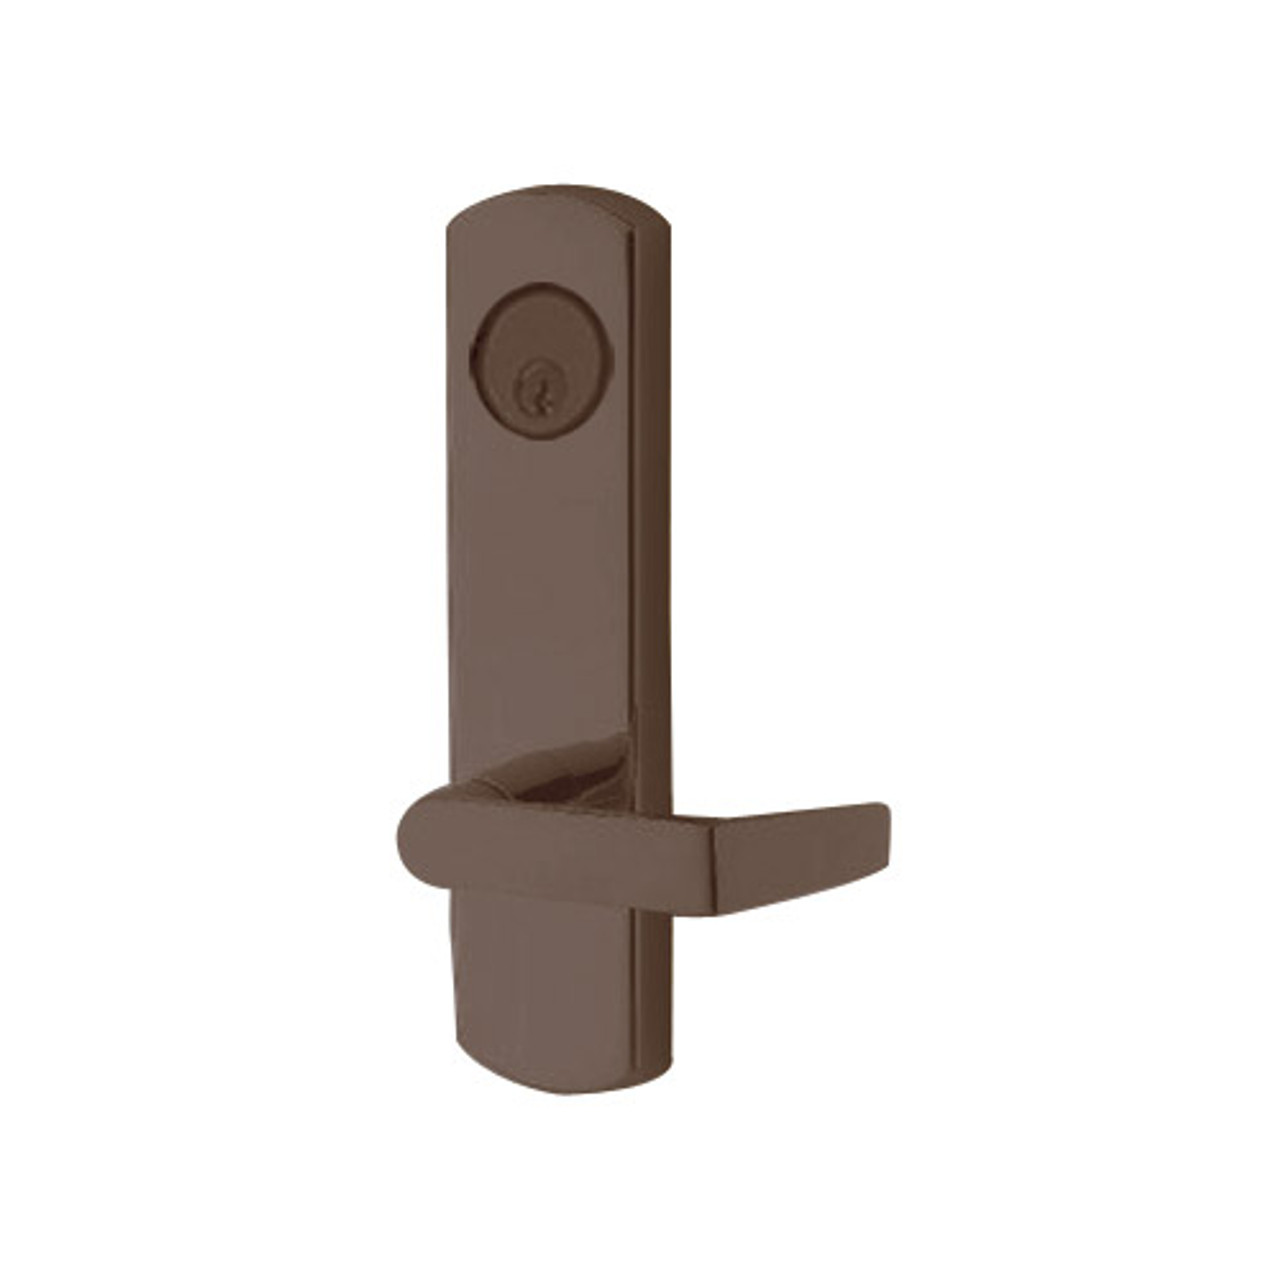 3080E-03-0-31-35 US10B Adams Rite Electrified Entry Trim with Square Lever in Oil Rubbed Bronze Finish